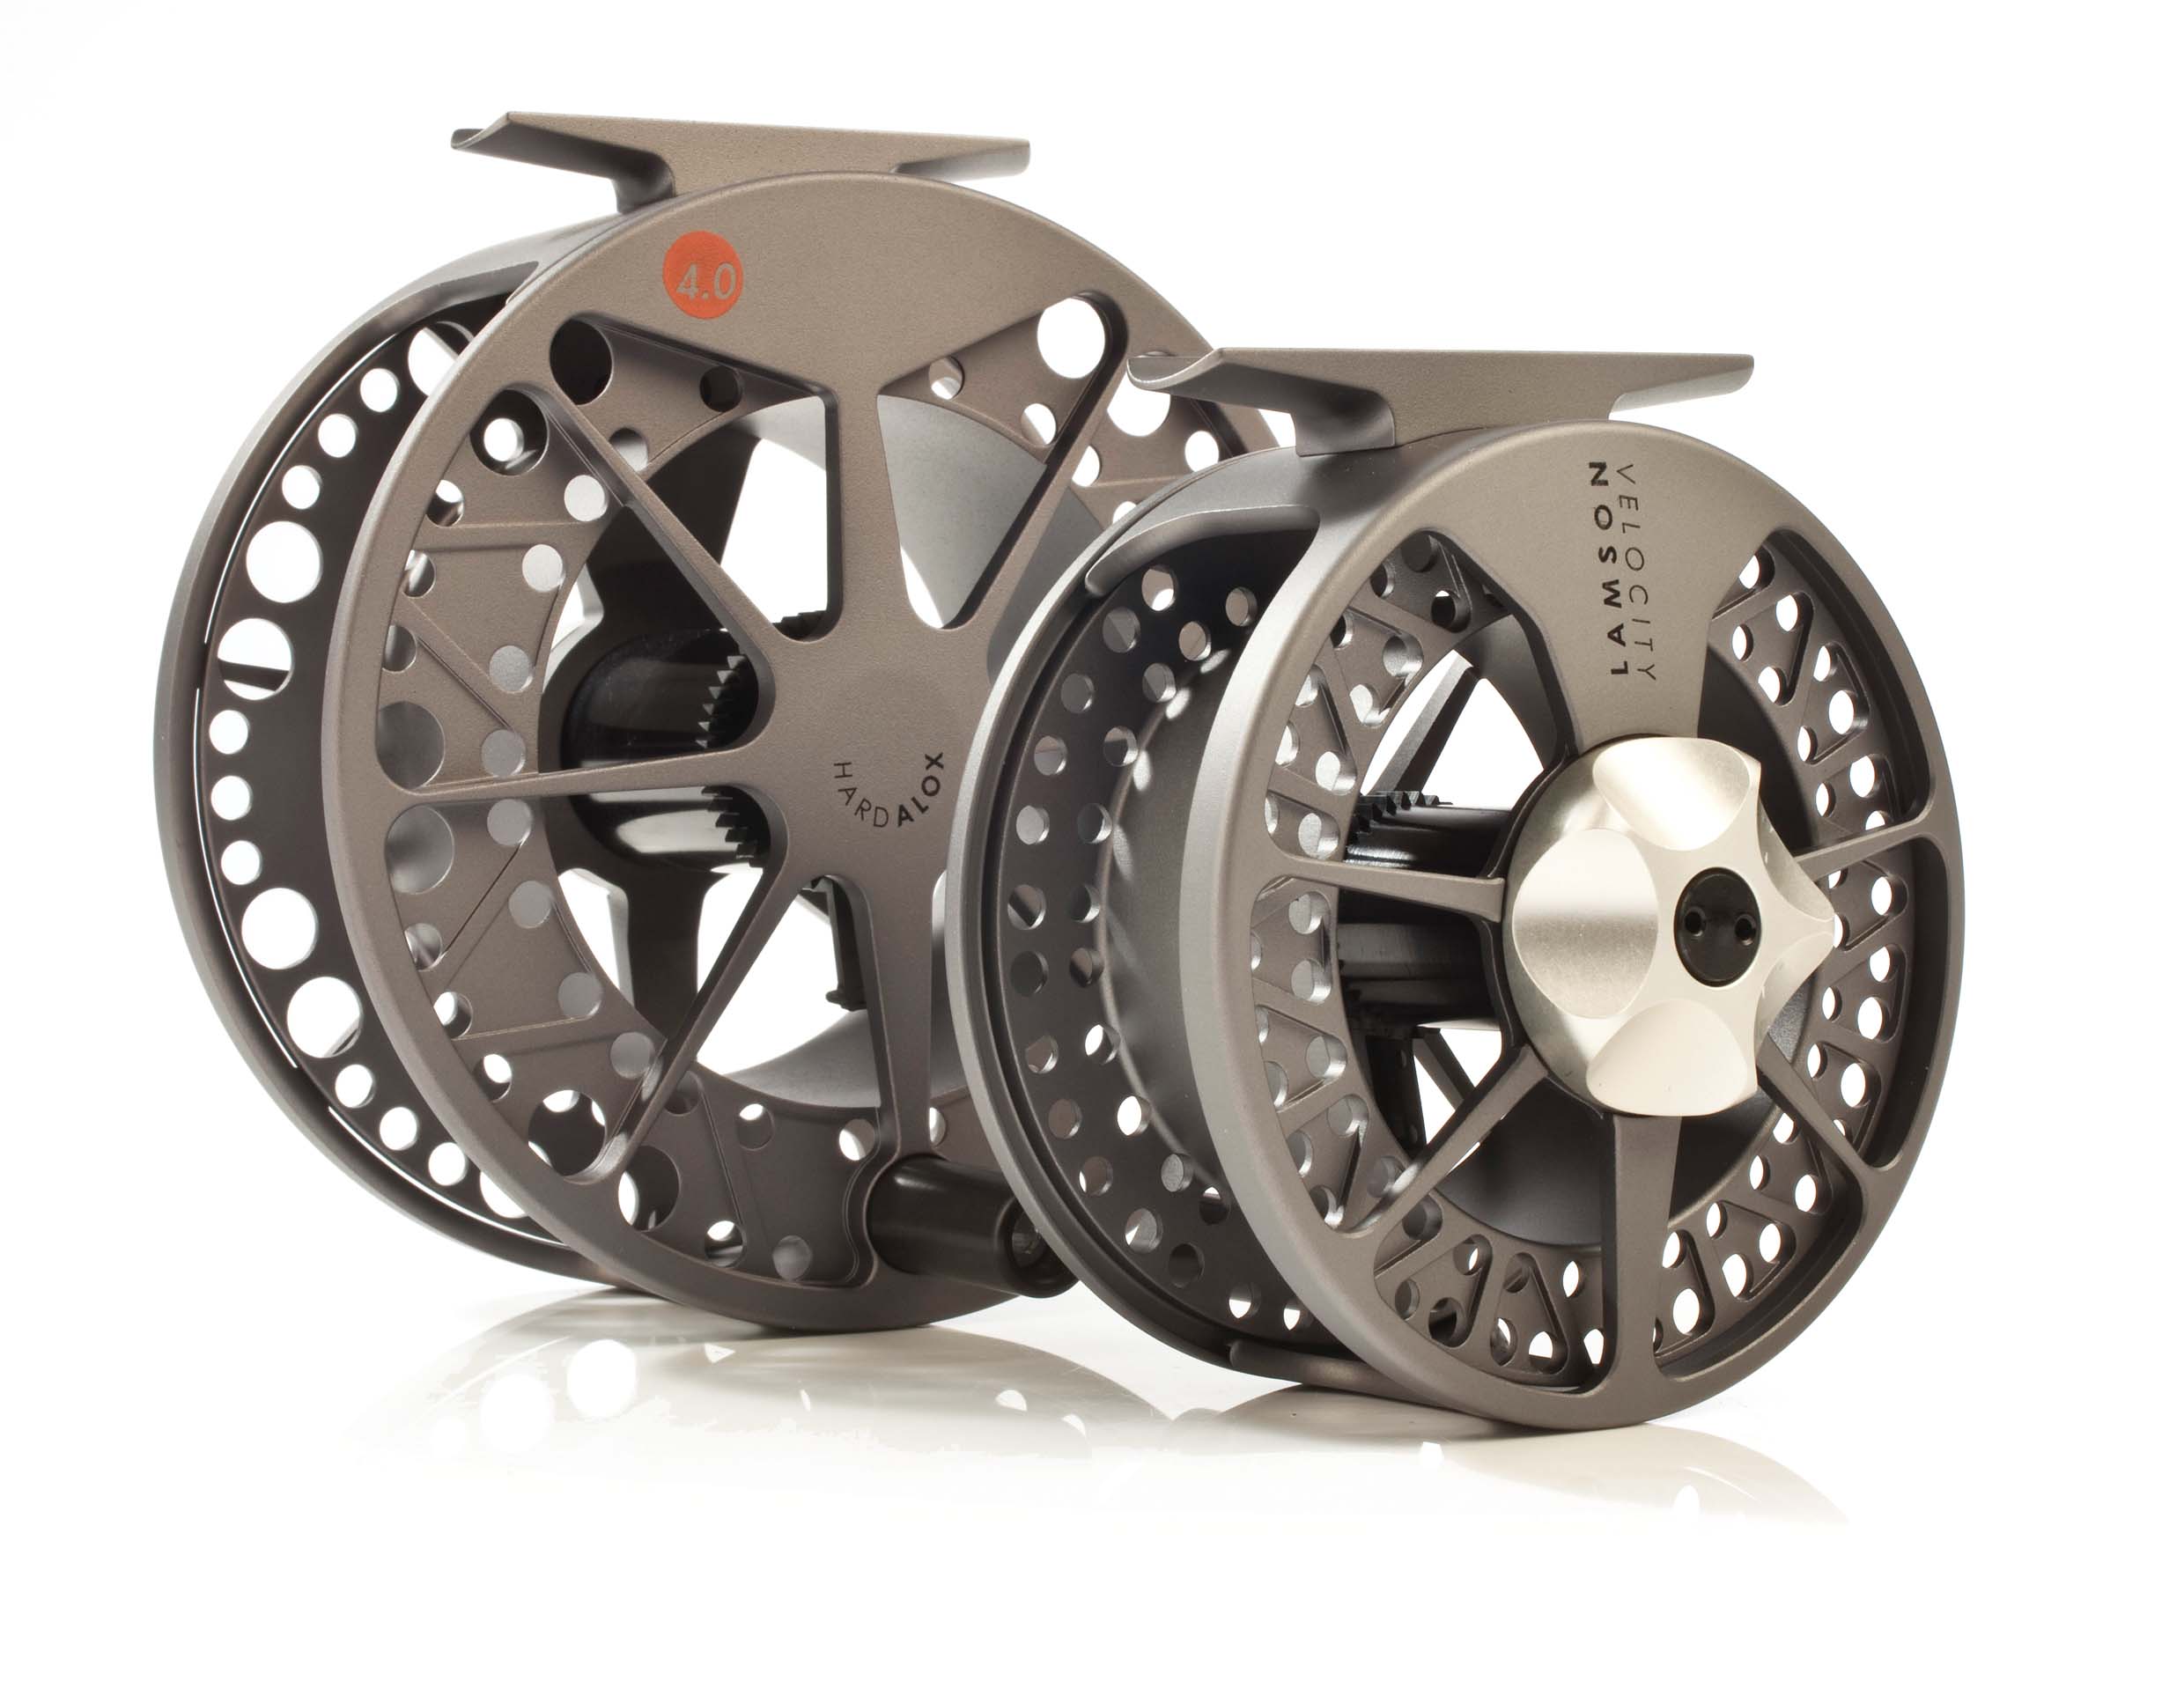 Kingfisher - A Review of the Waterworks Lamson Litespeed Reel